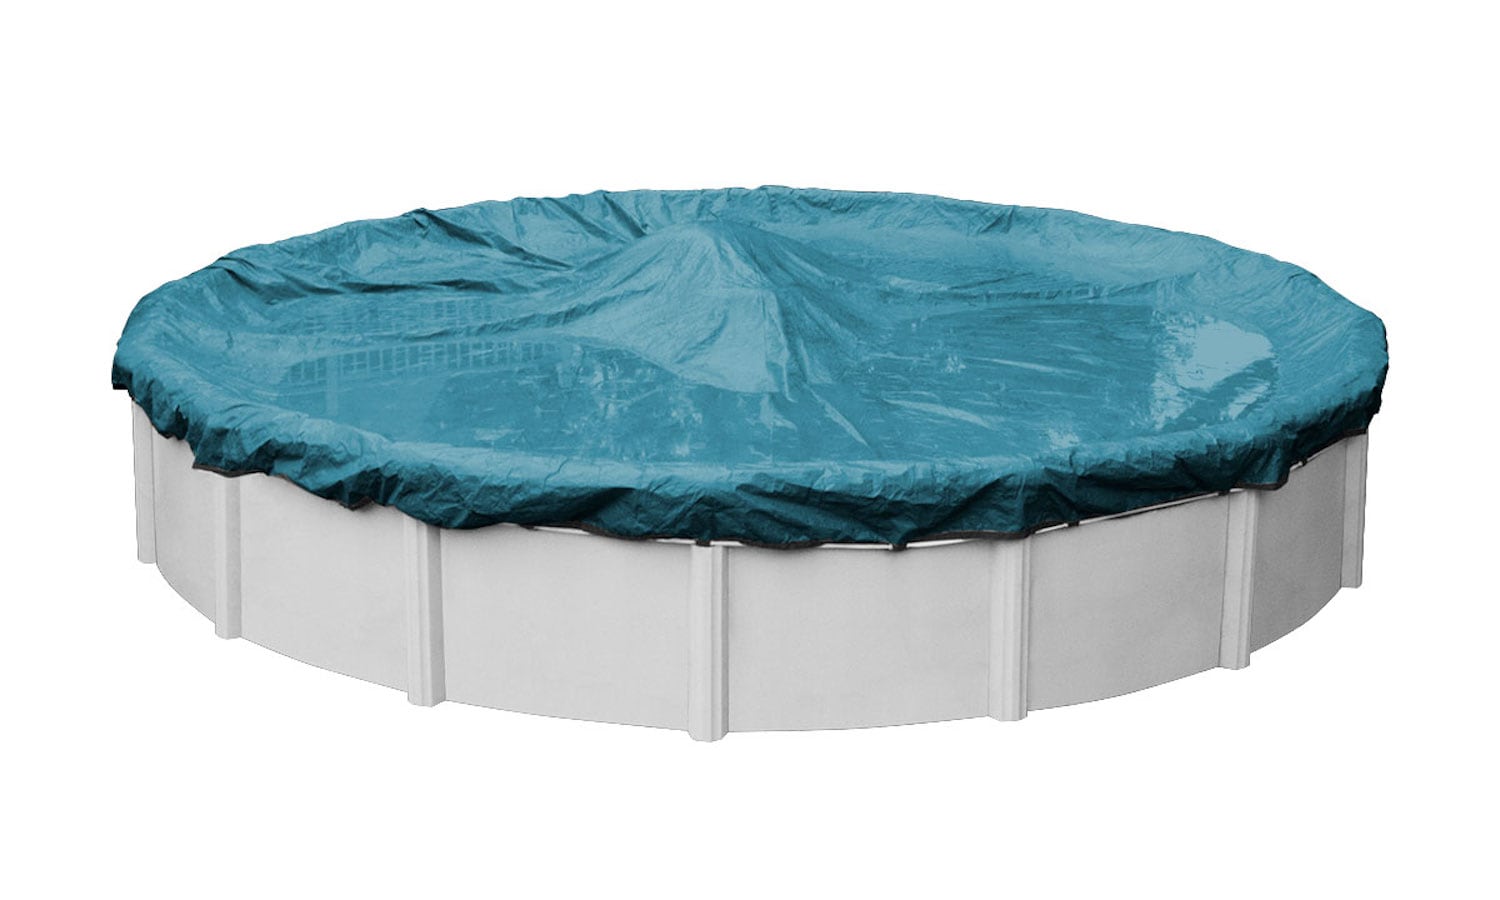 21-ft Round Pool Covers at